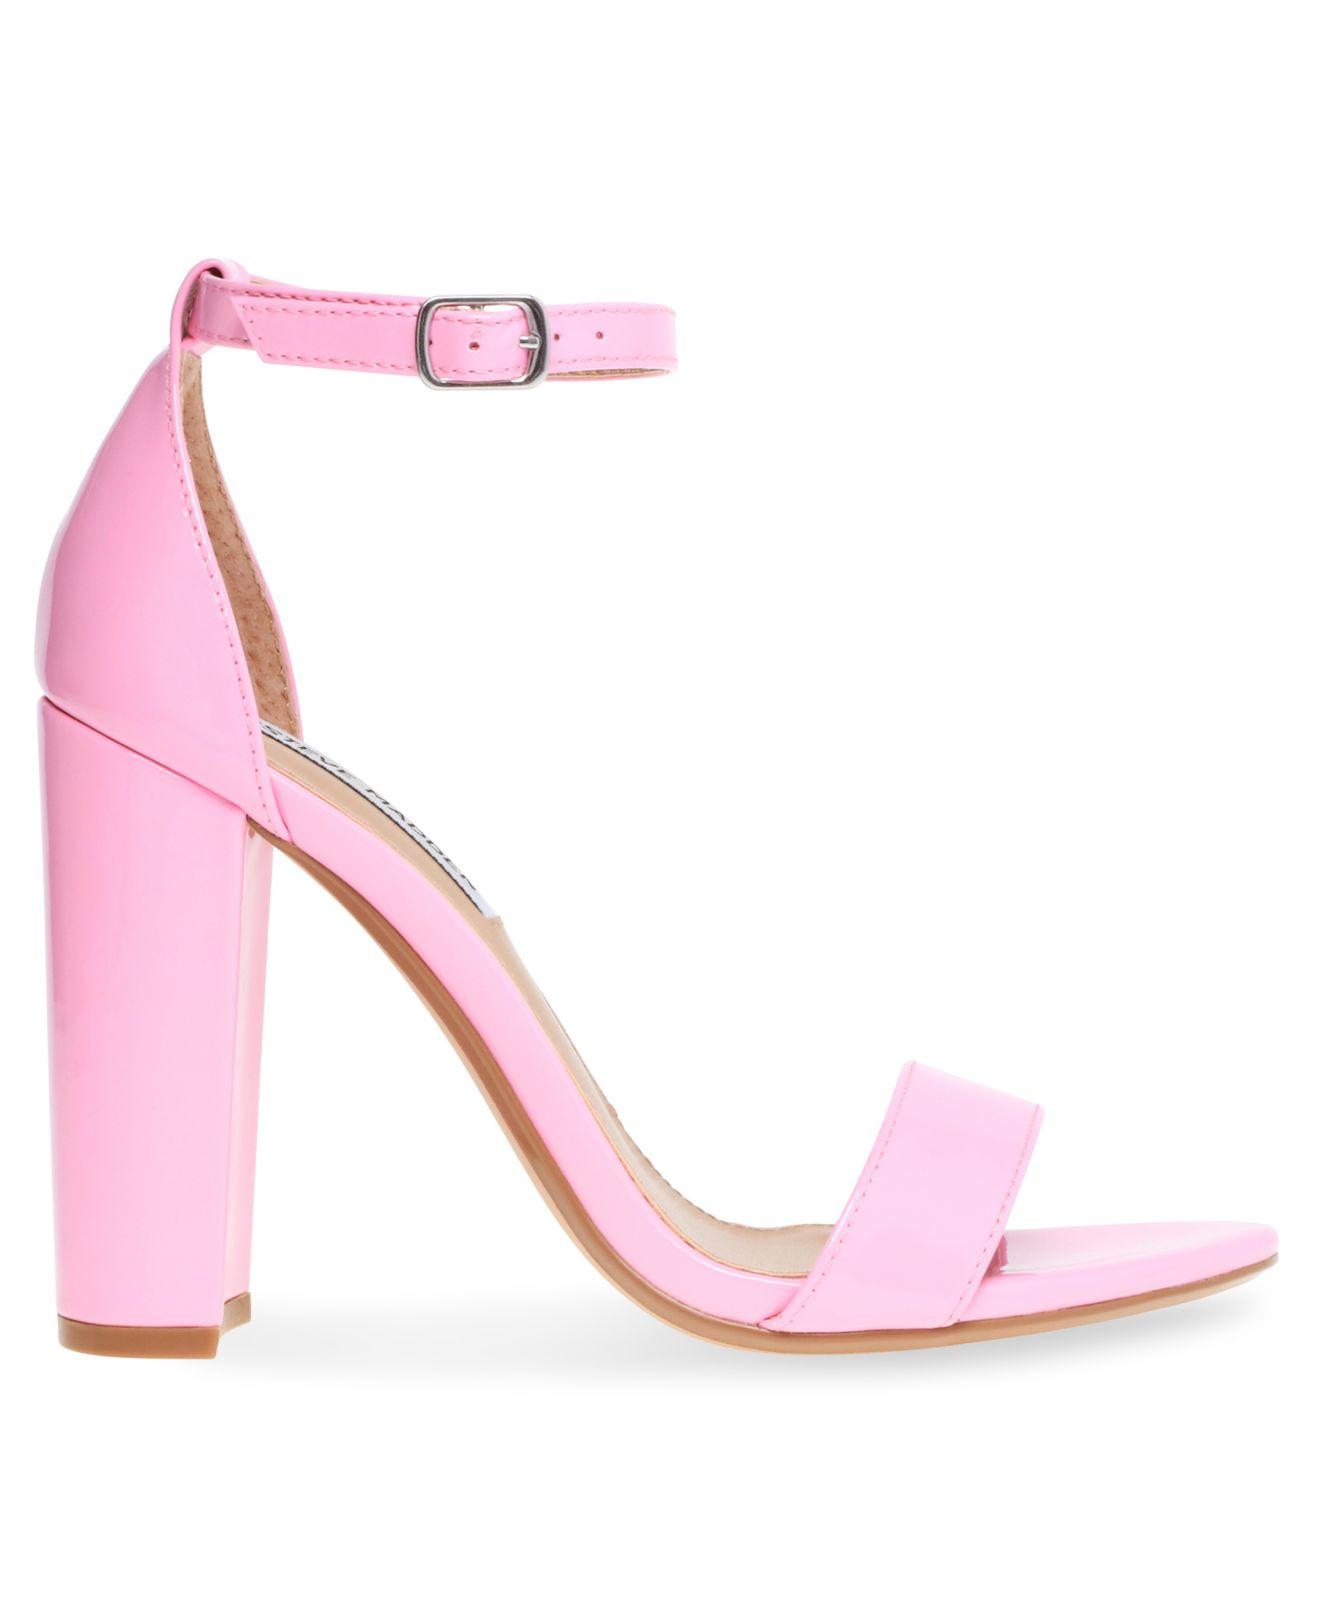 Steve Madden Suede Carrson Two-piece Sandals in Candy Pink Patent (Pink) |  Lyst